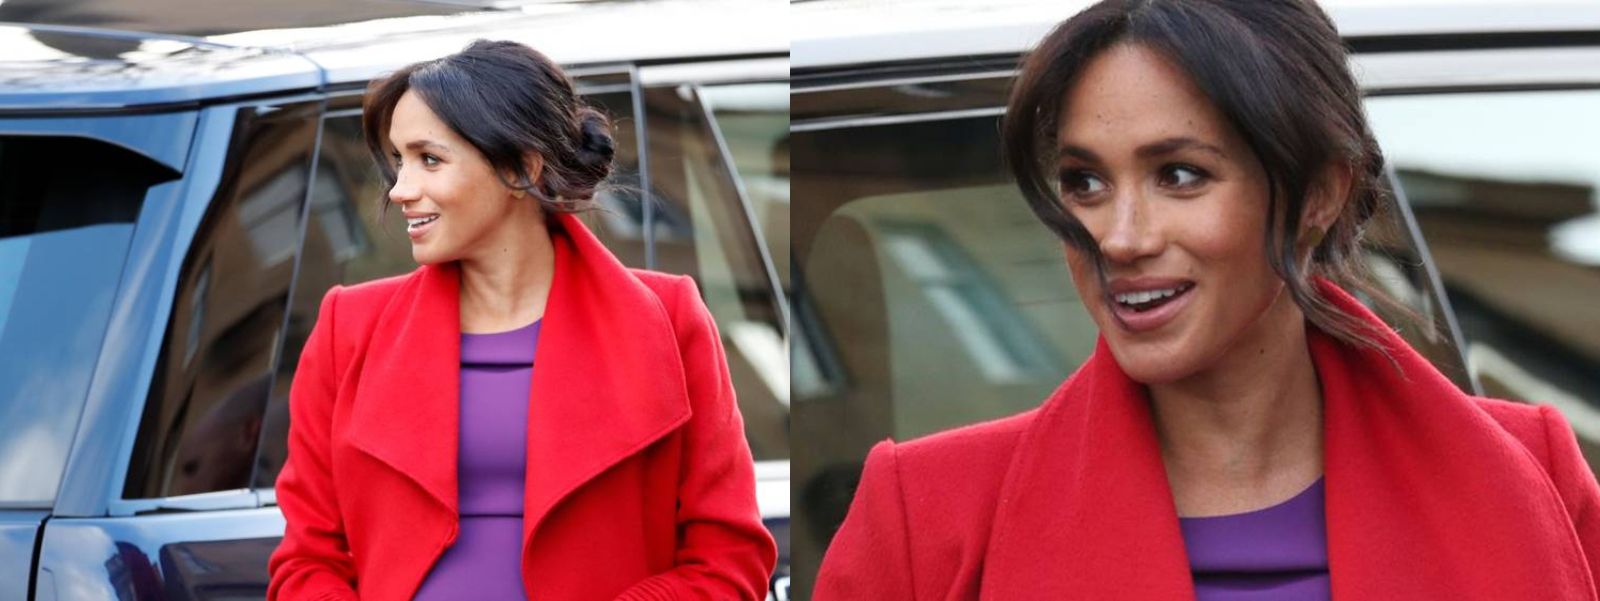 images easyblog articles 7237 meghan markle red coat and purple dress style f2c2ff19